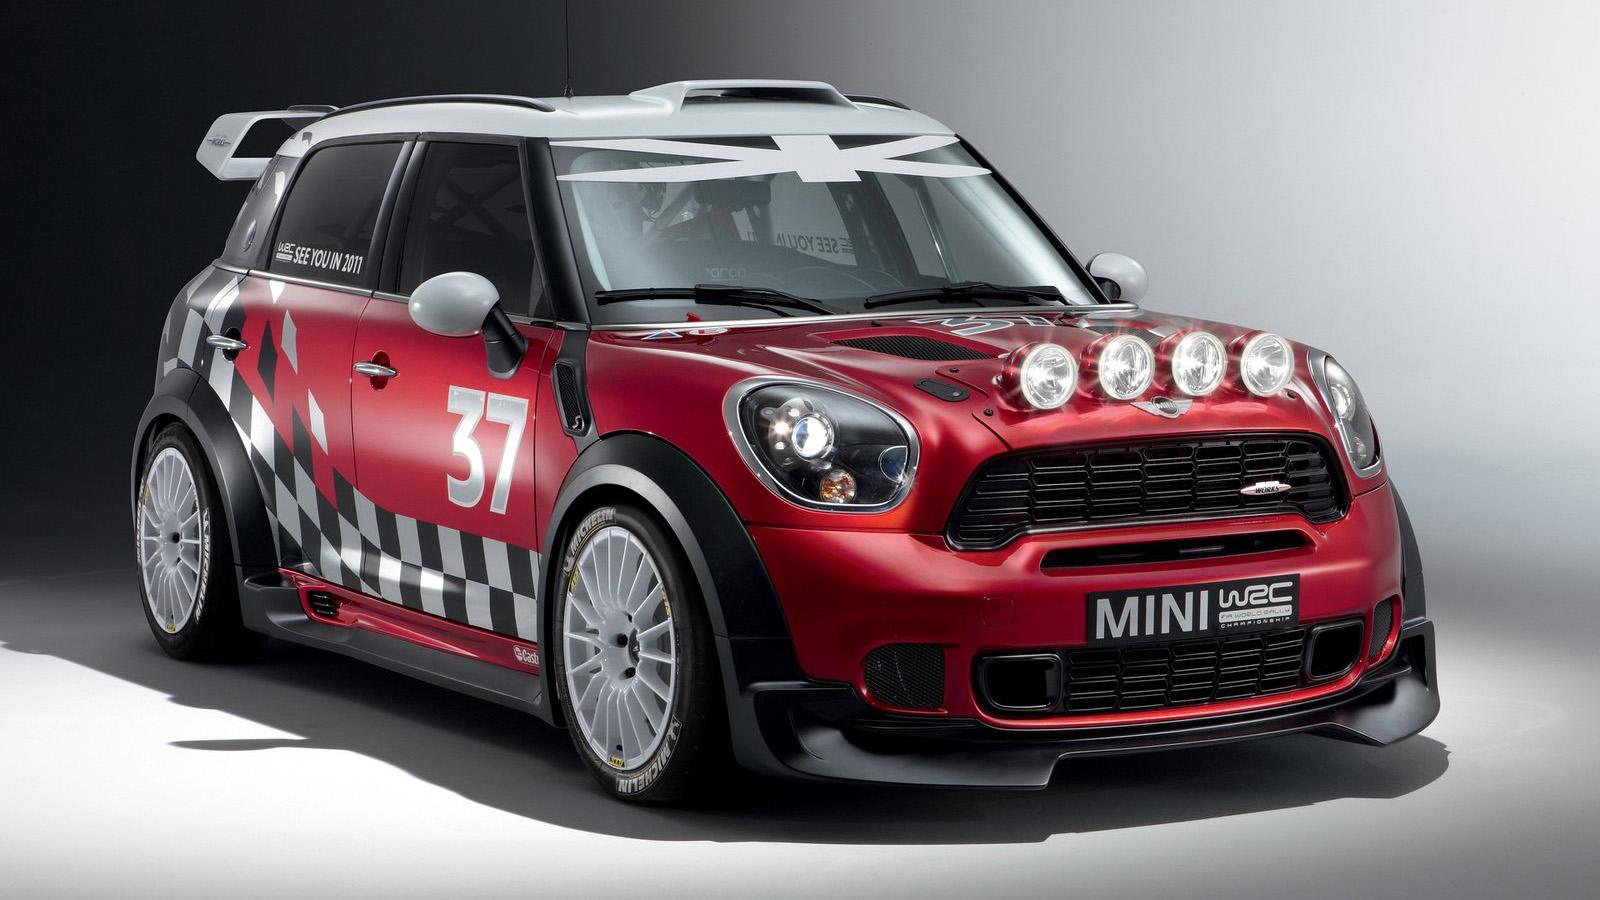 Mini Cooper S Inspired By Goodwood Wallpapers